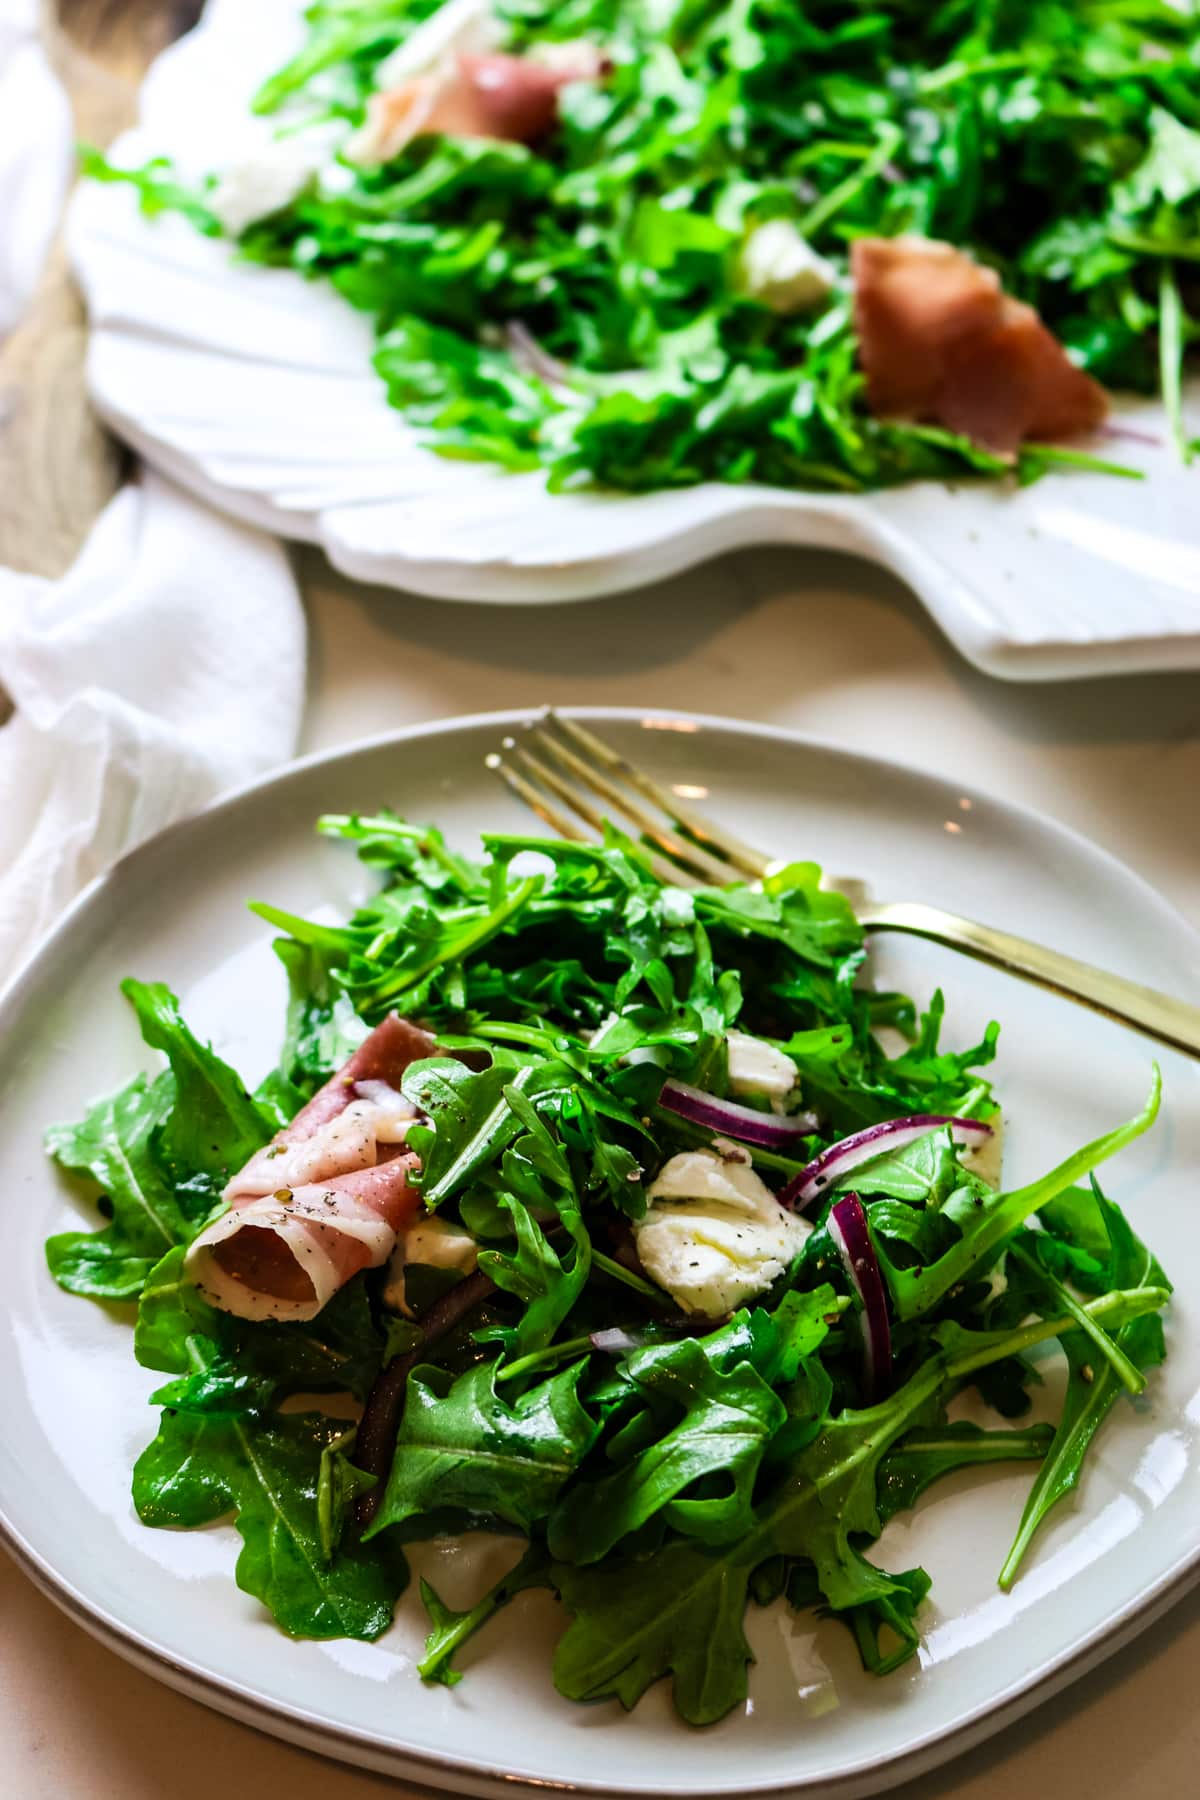 a serving of simple arugula salad on a white plate with the serving platter in the background.